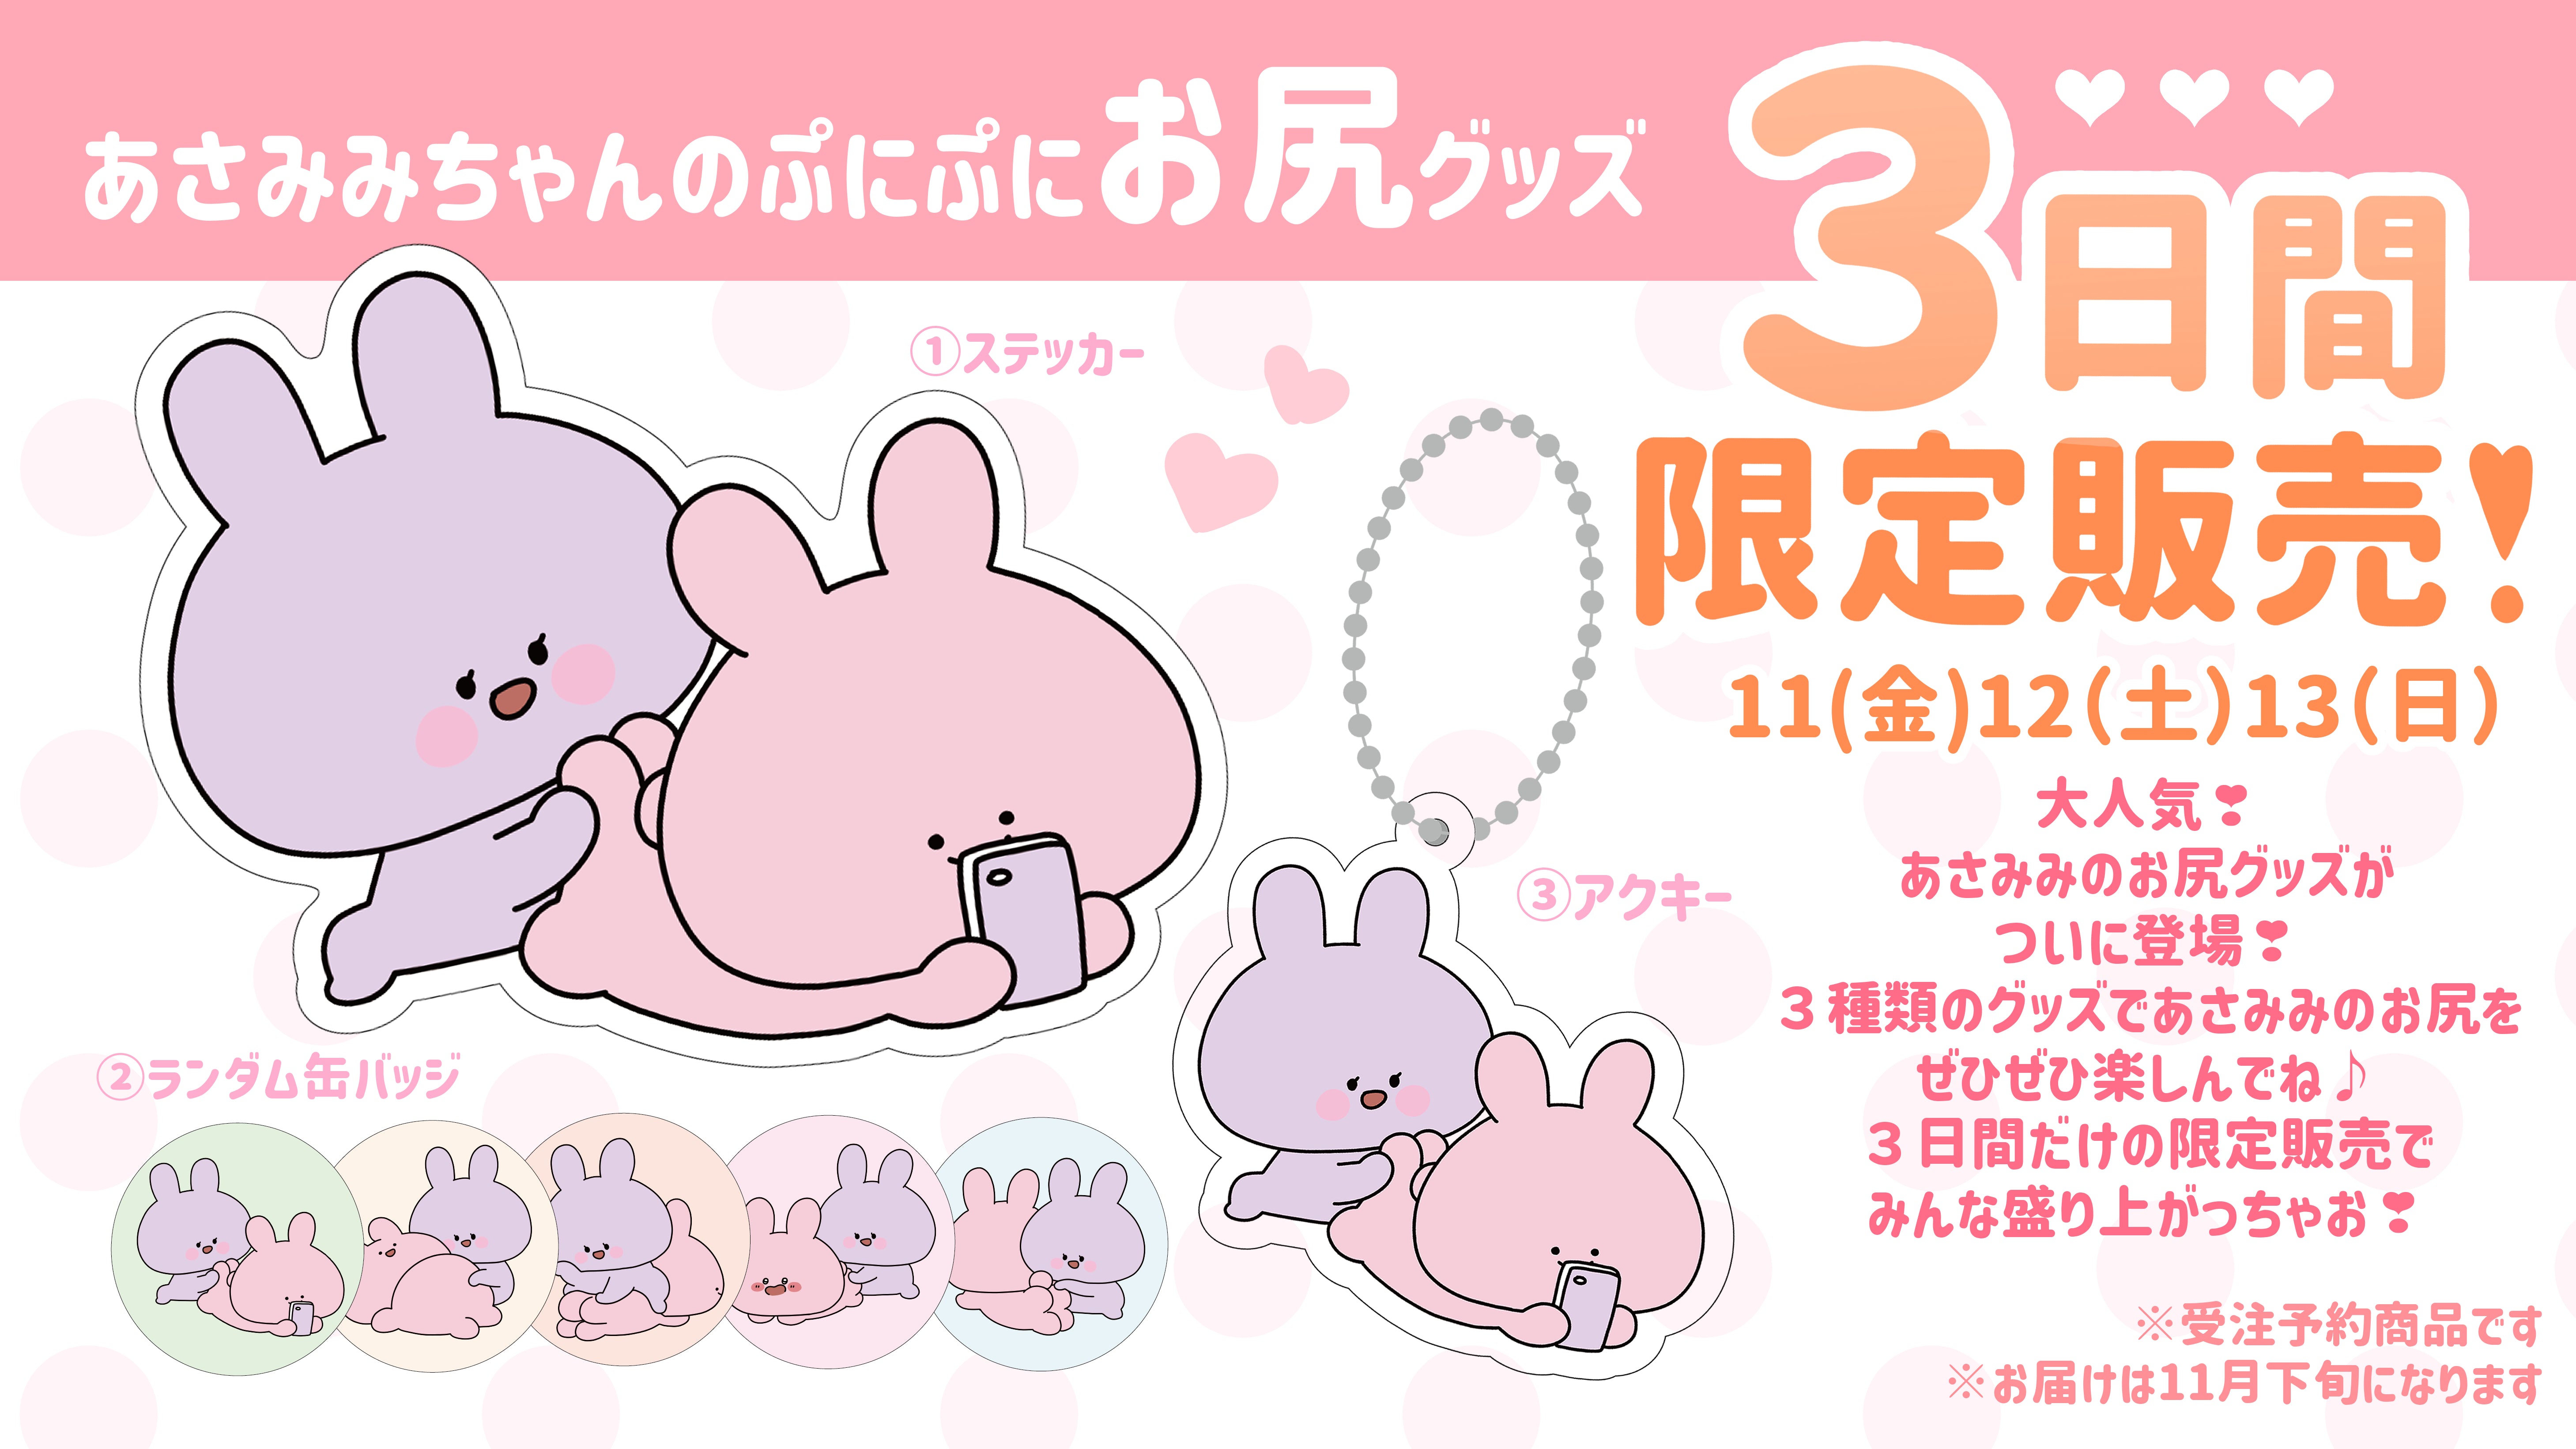 ASAMIMI buttocks series🍑【Limited to 3 days】 – SimpleSideMascots